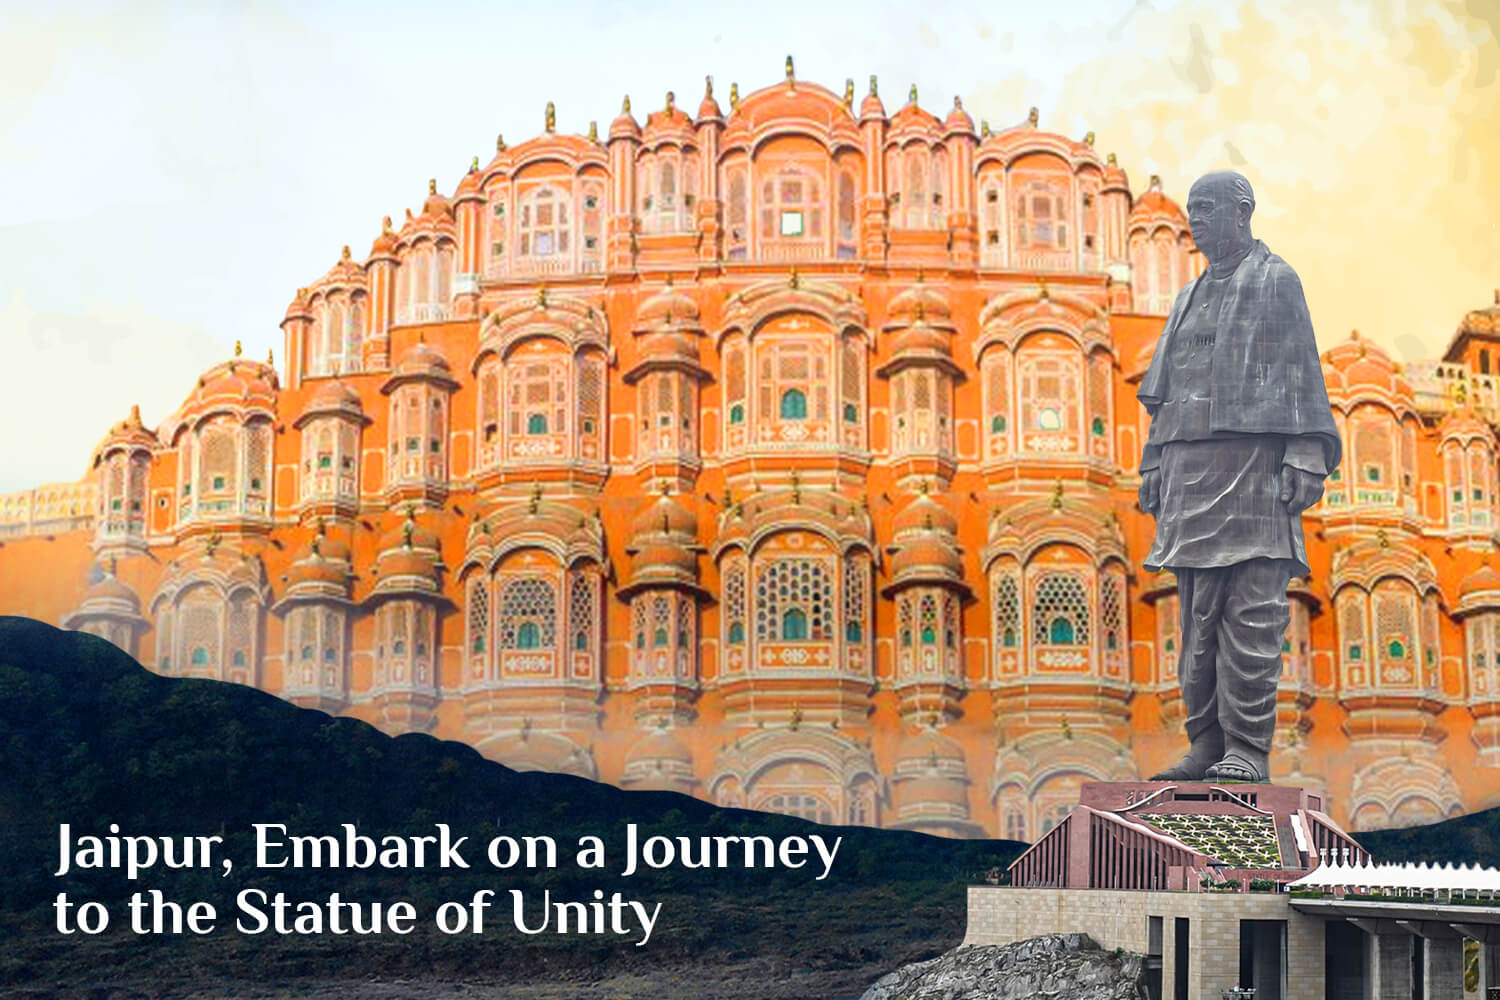 Jaipur to Statue of Unity